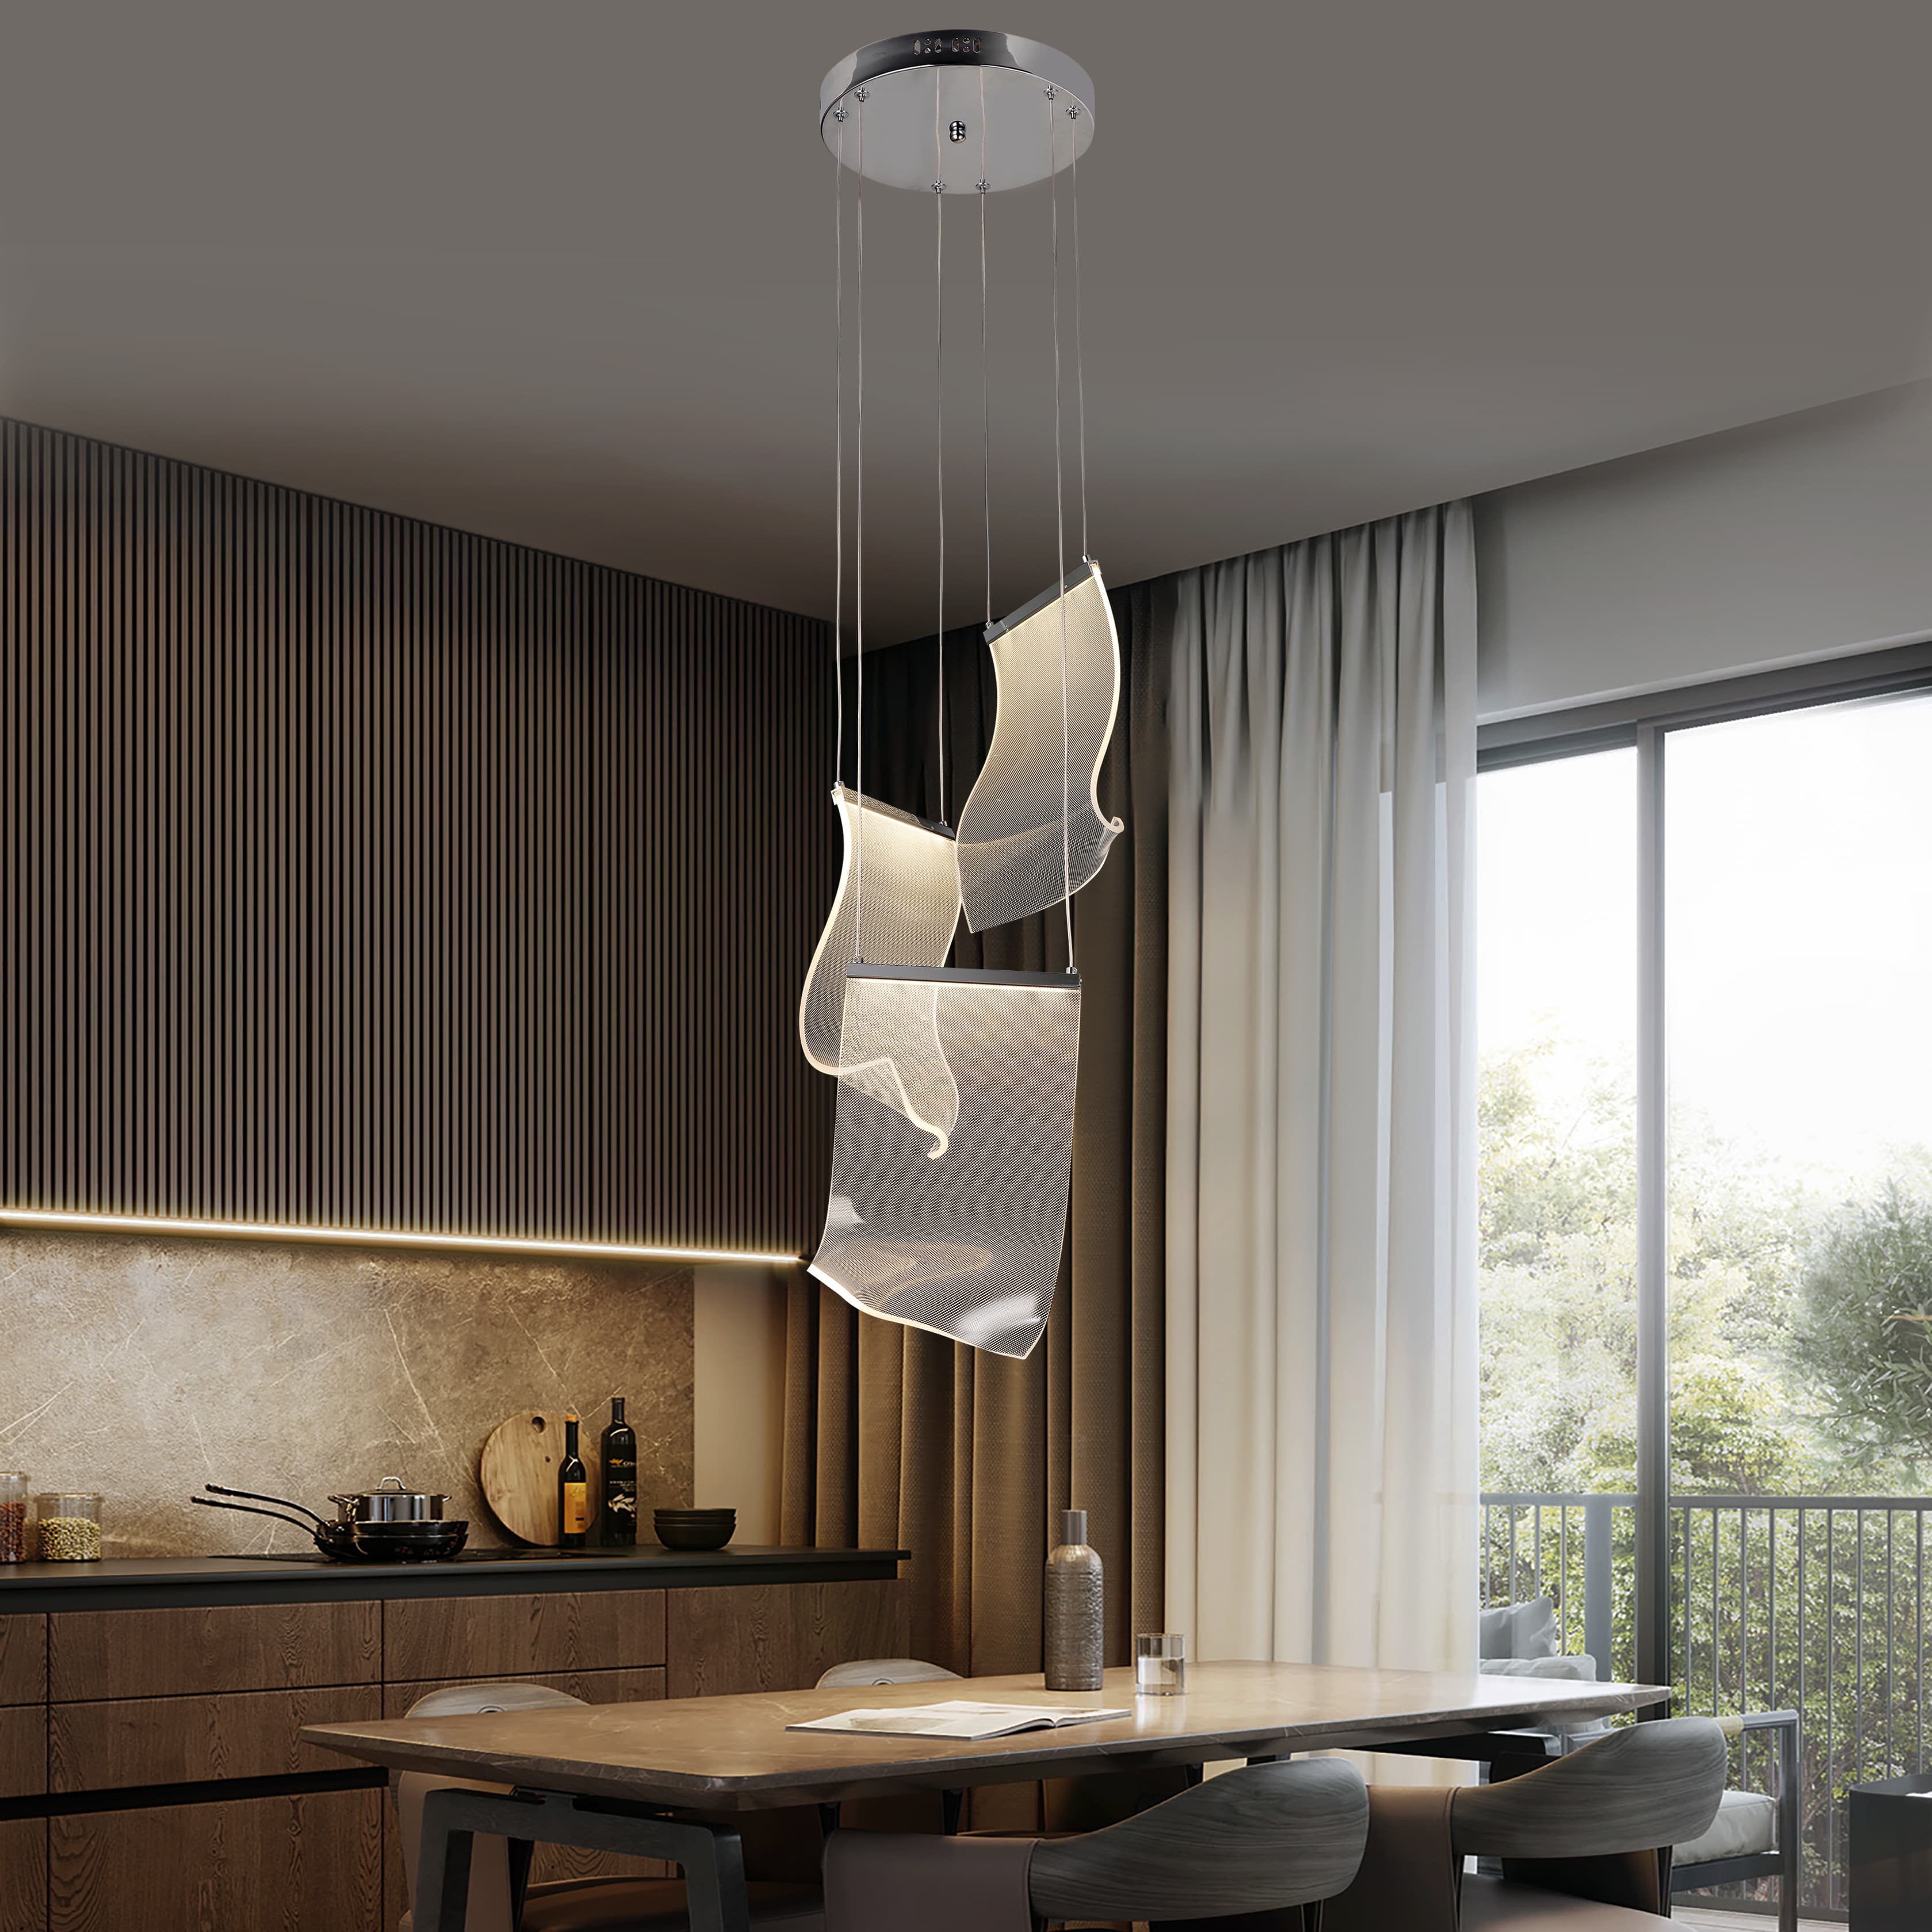 LIFE LED™ Abstract three sheets LED Pendant Light chandelier with chrome finish small size for kitchen bar , living room , bedroom and hallway . Visit Viva led for more new led chandeliers style .